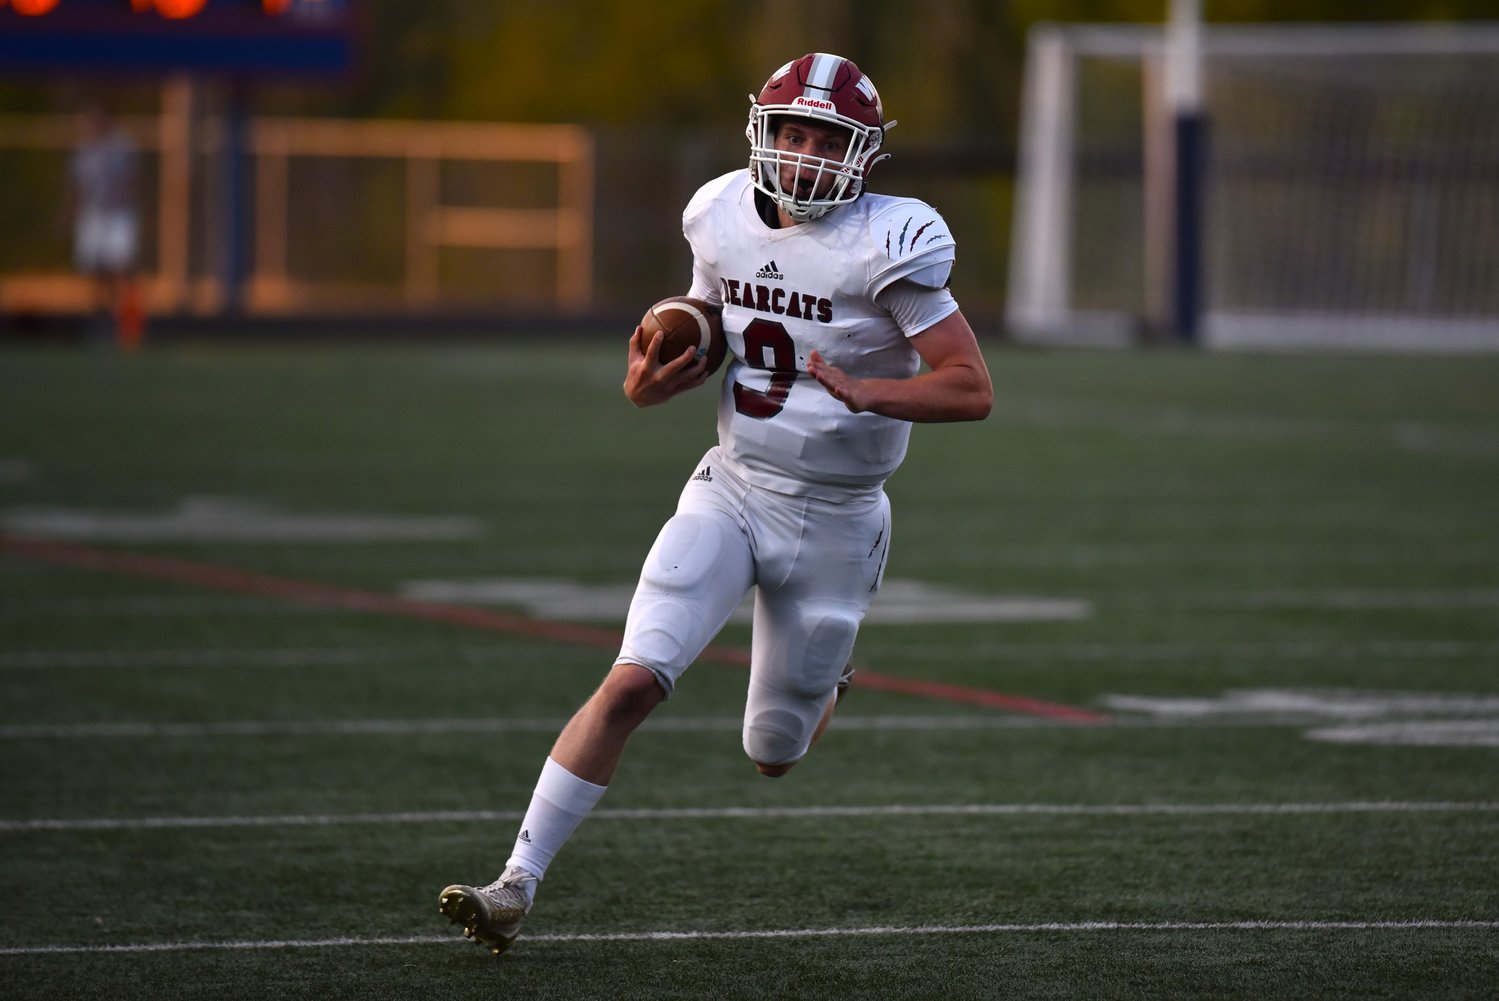 W.F. West quarterback Gavin Fugate turns the corner on a 46-yard touchdown run in the first quarter of the Bearcats' 38-28 win at Ridgefield on Sept. 3.